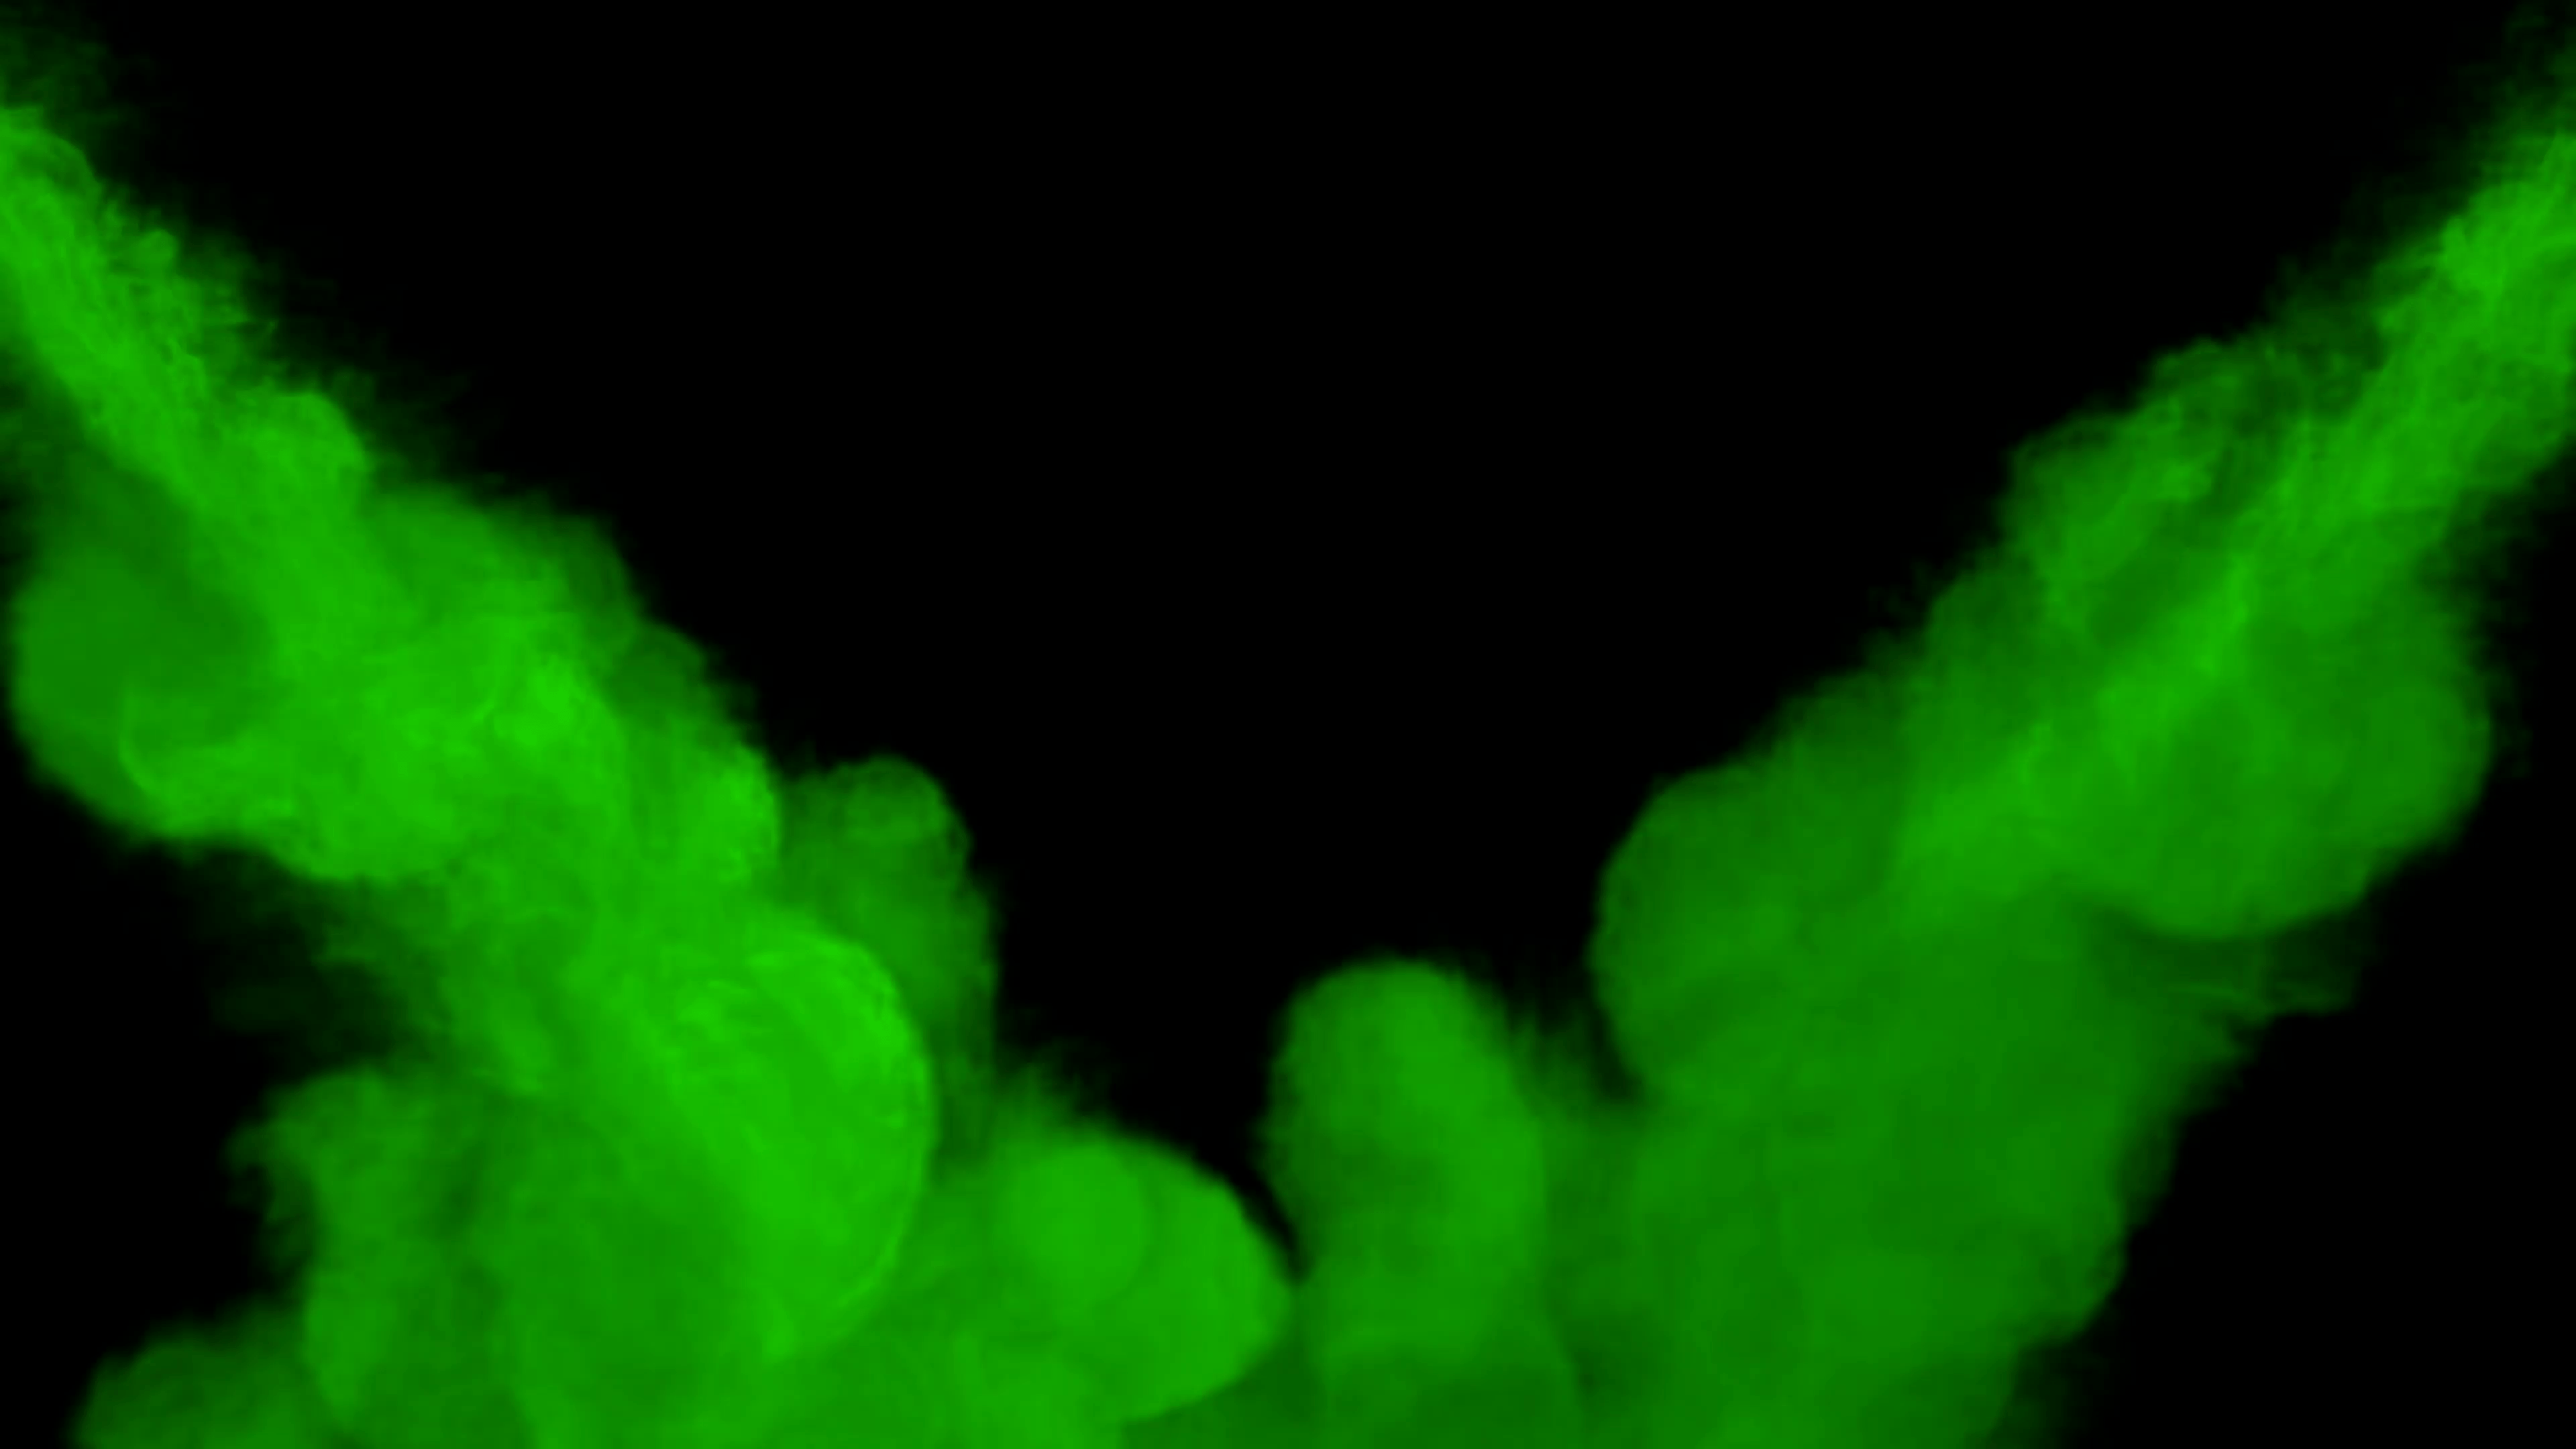 Animated green toxic smoke filling up whole screen against